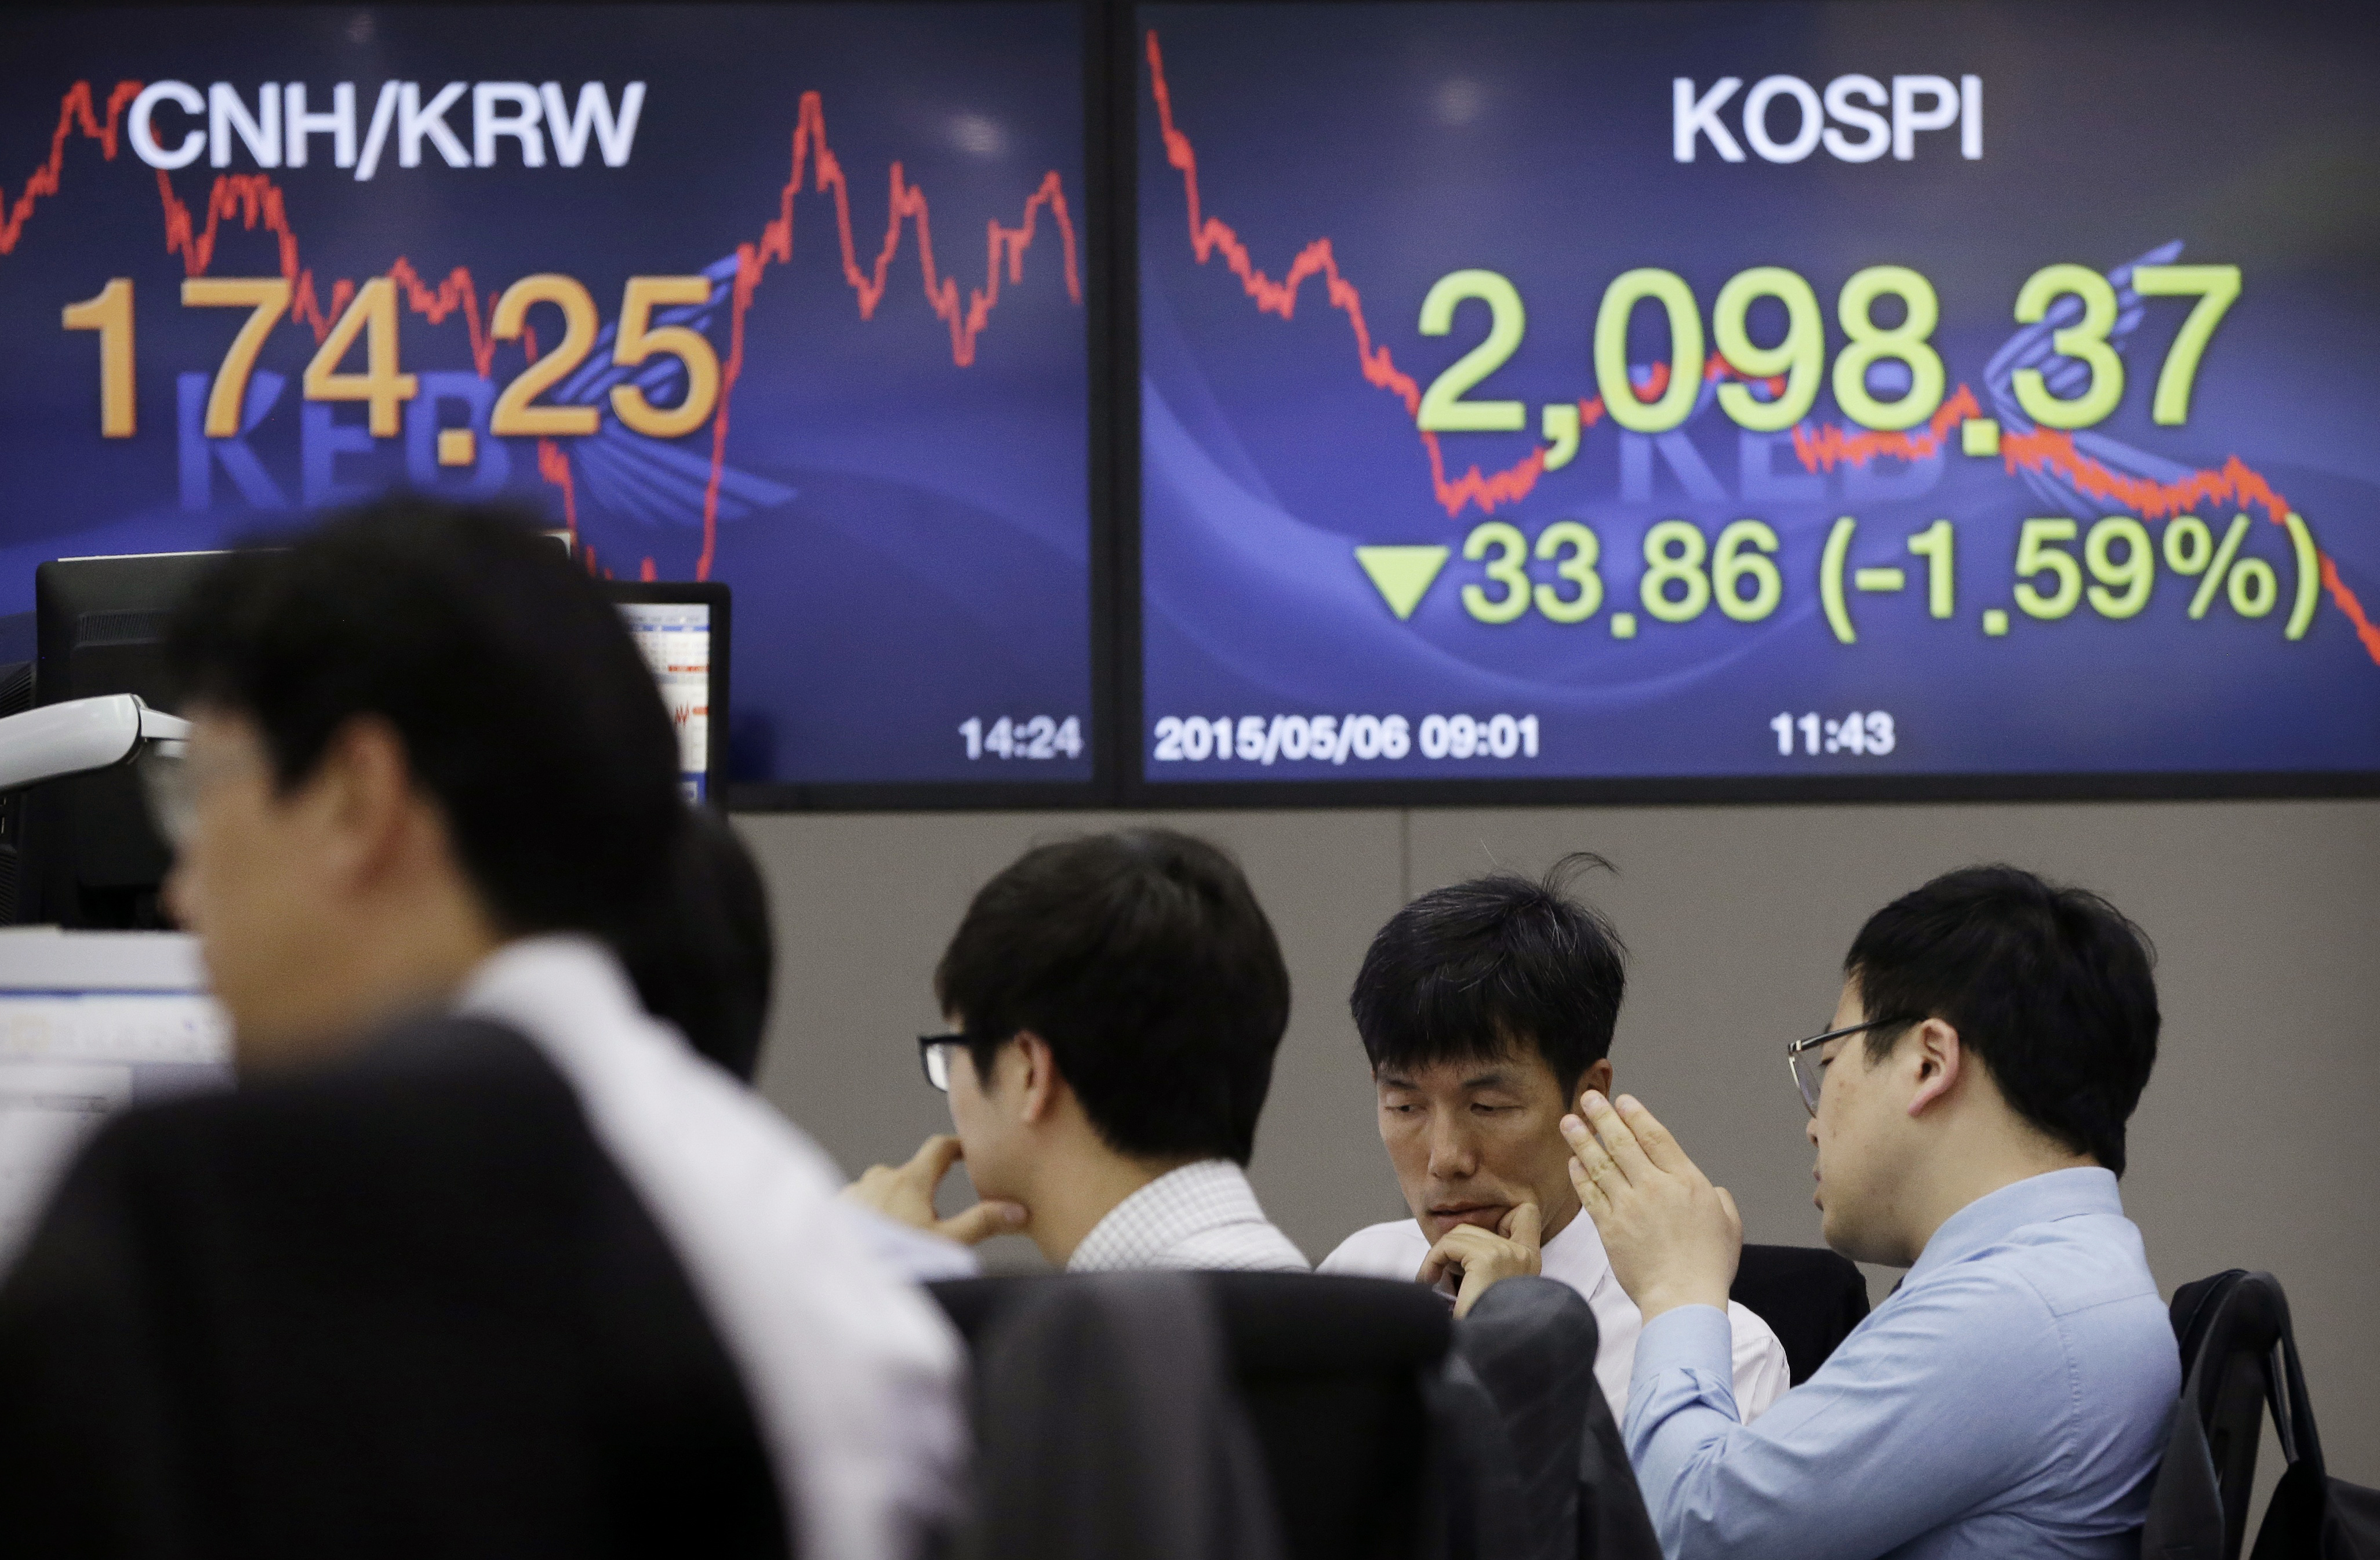 The rate of the CNH looms in the background of currency traders in Korea. China's yuan strengthened for the third day running. Photo: AP